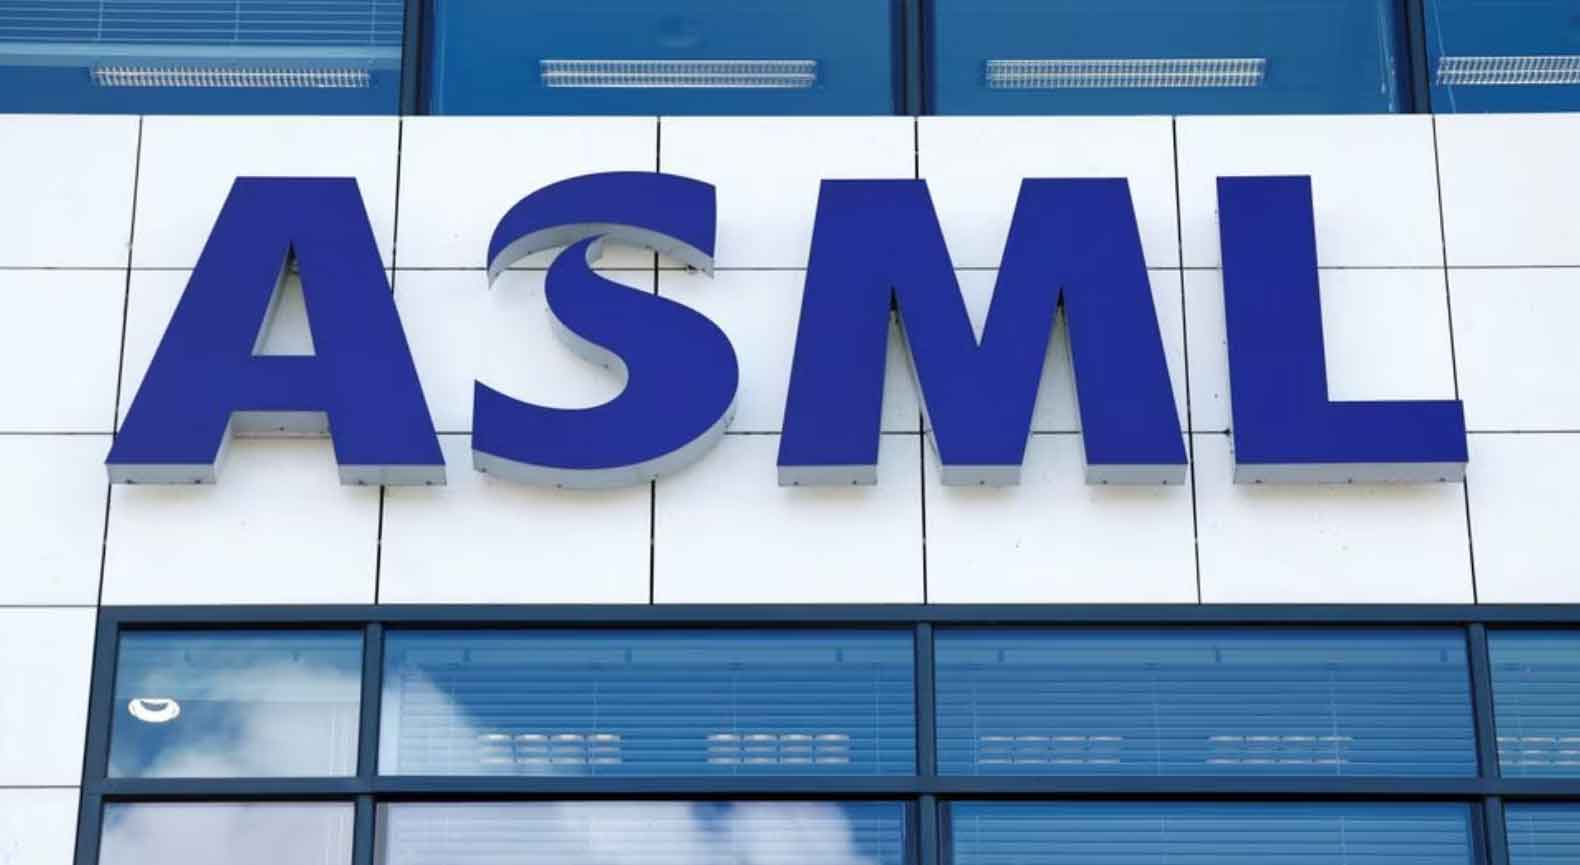 ASML to Ship First Pilot Tool in its Next Product Line in 2023 -CEO